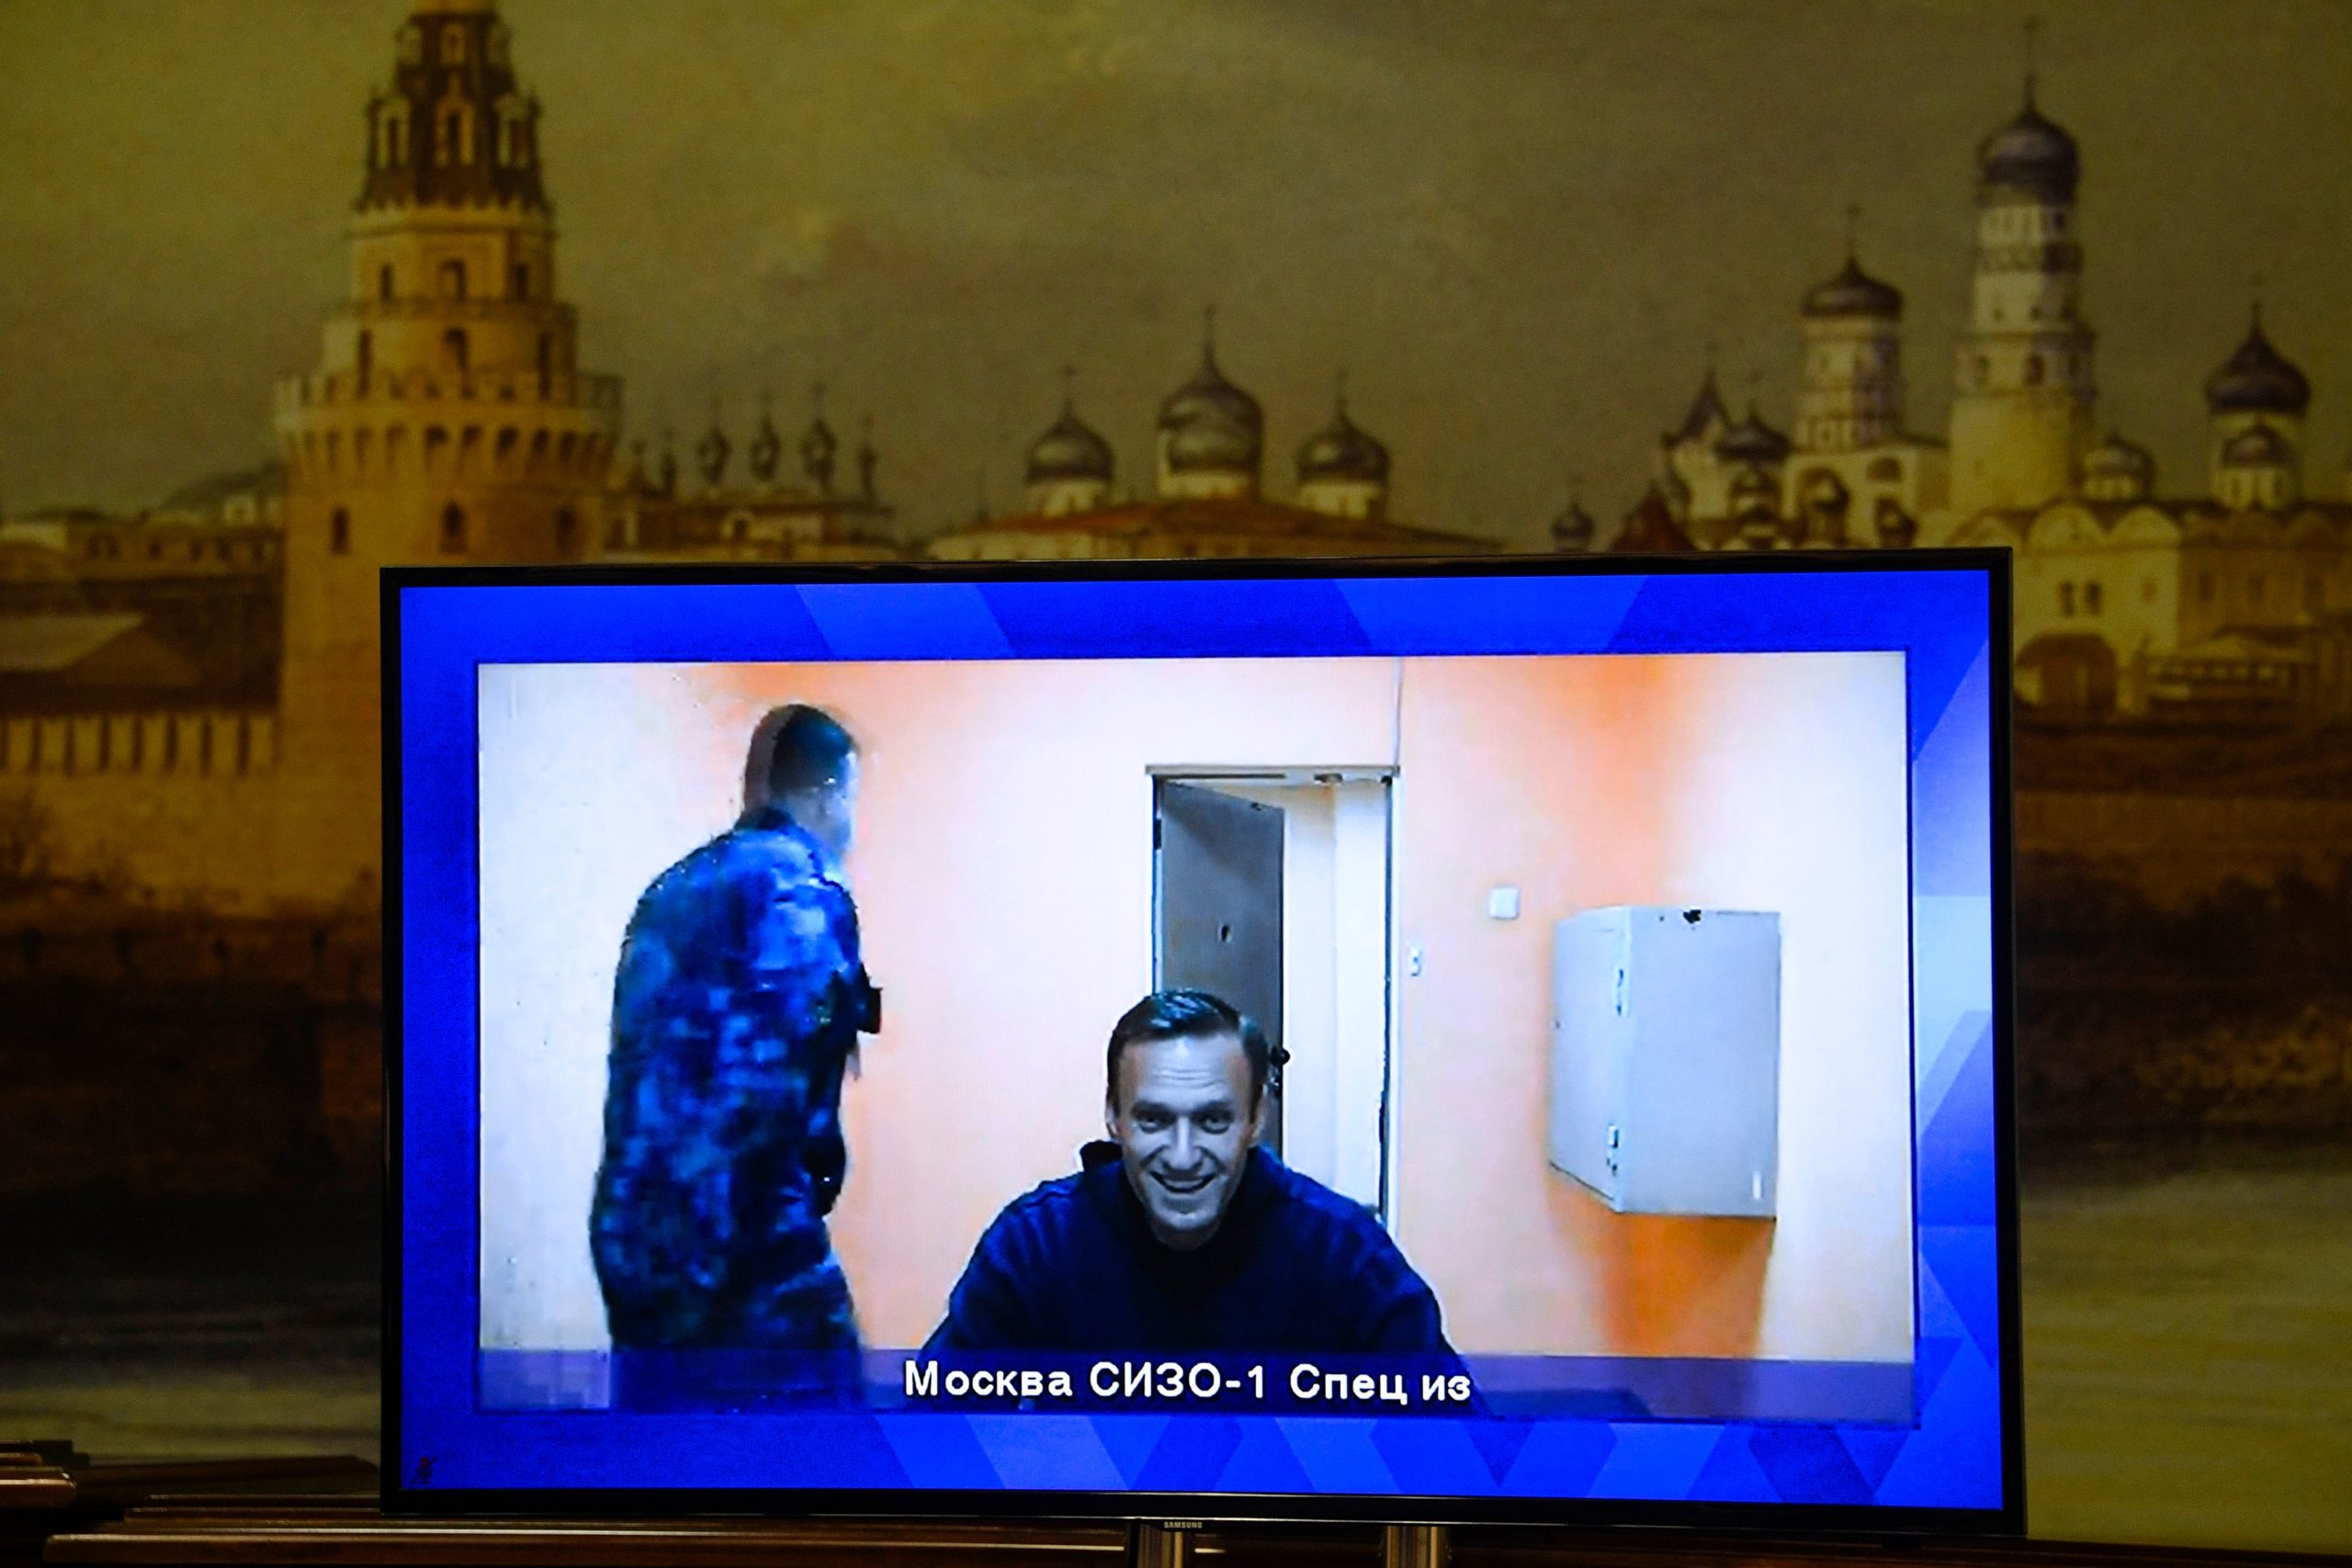 Opposition leader Alexei Navalny appears on a screen set up at a hall of the Moscow Regional Court via a video link from Moscow's penal detention centre Number 1 (known as Matrosskaya Tishina) during a court hearing of an appeal against his arrest, in Krasnogorsk outside Moscow on January 28, 2021. - Navalny, 44, was detained on January 17 upon returning to Moscow after five months in Germany recovering from a near-fatal poisoning with a nerve agent and later jailed for 30 days while awaiting trial for violating a suspended sentence he was handed in 2014. (Photo by Alexander NEMENOV / AFP) (Photo by ALEXANDER NEMENOV/AFP via Getty Images)